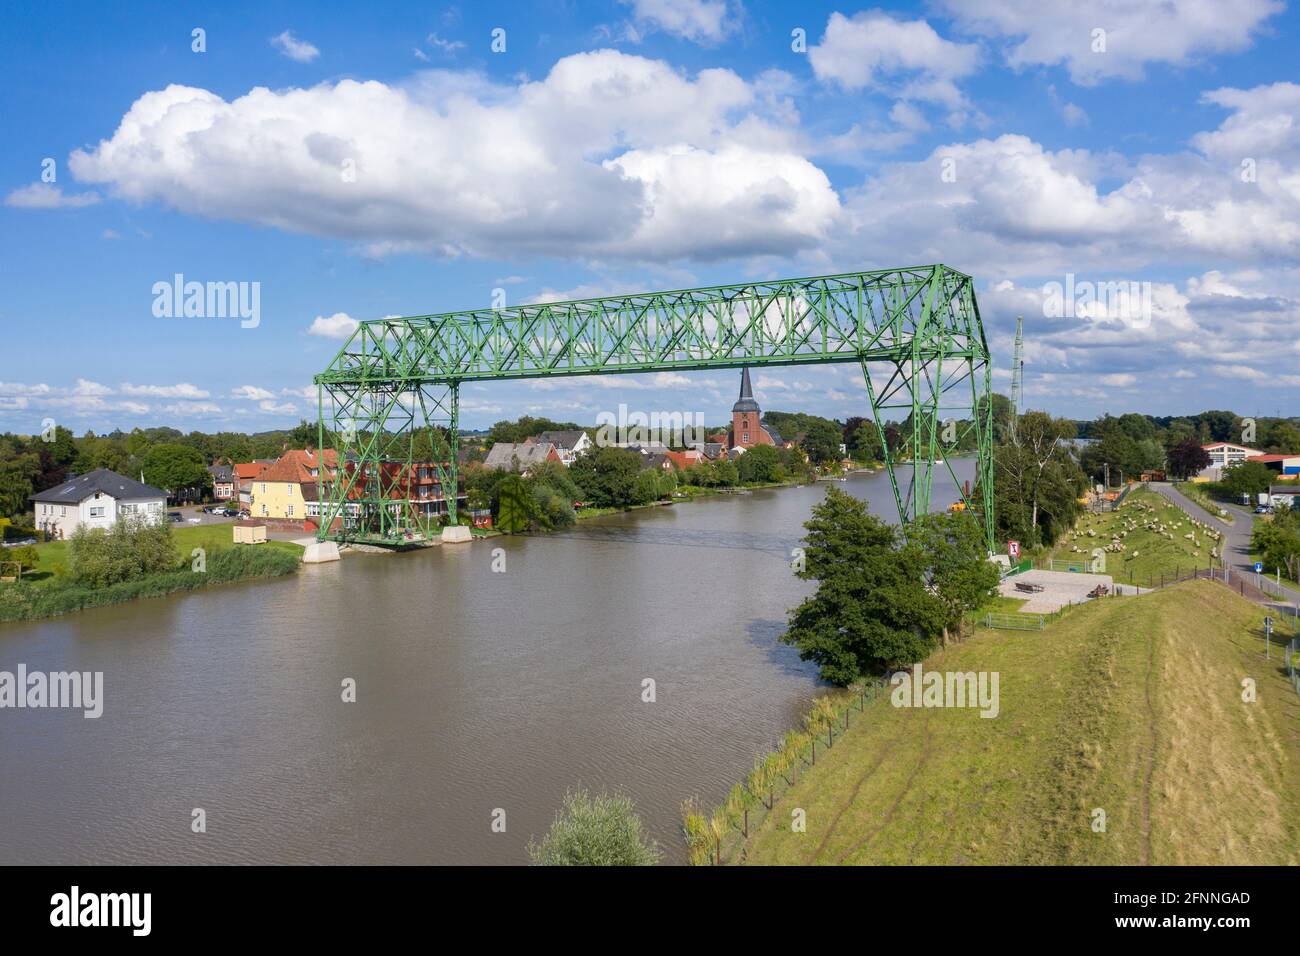 Aerial view with the transporter bridge Osten-Hemmoor over river Oste, Osten, Lower Saxony, Germany, Europe Stock Photo